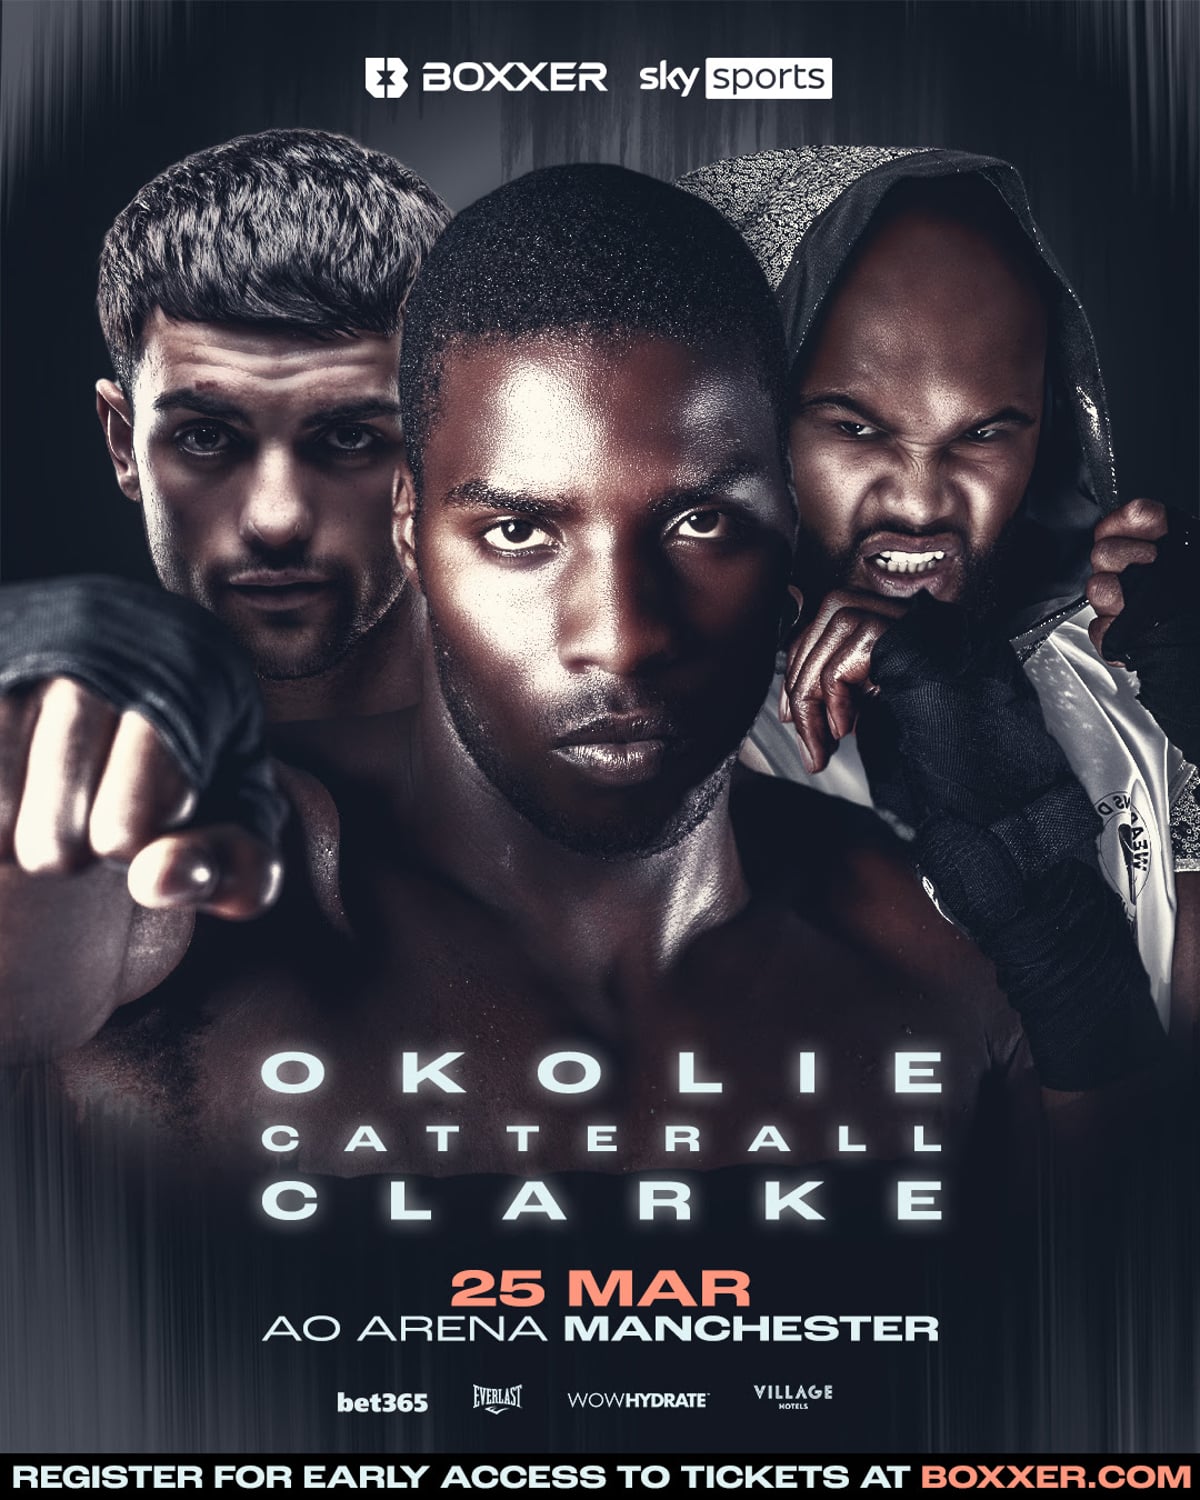 Image: Lawrence Okolie defends against David Light on March 25th in Manchester